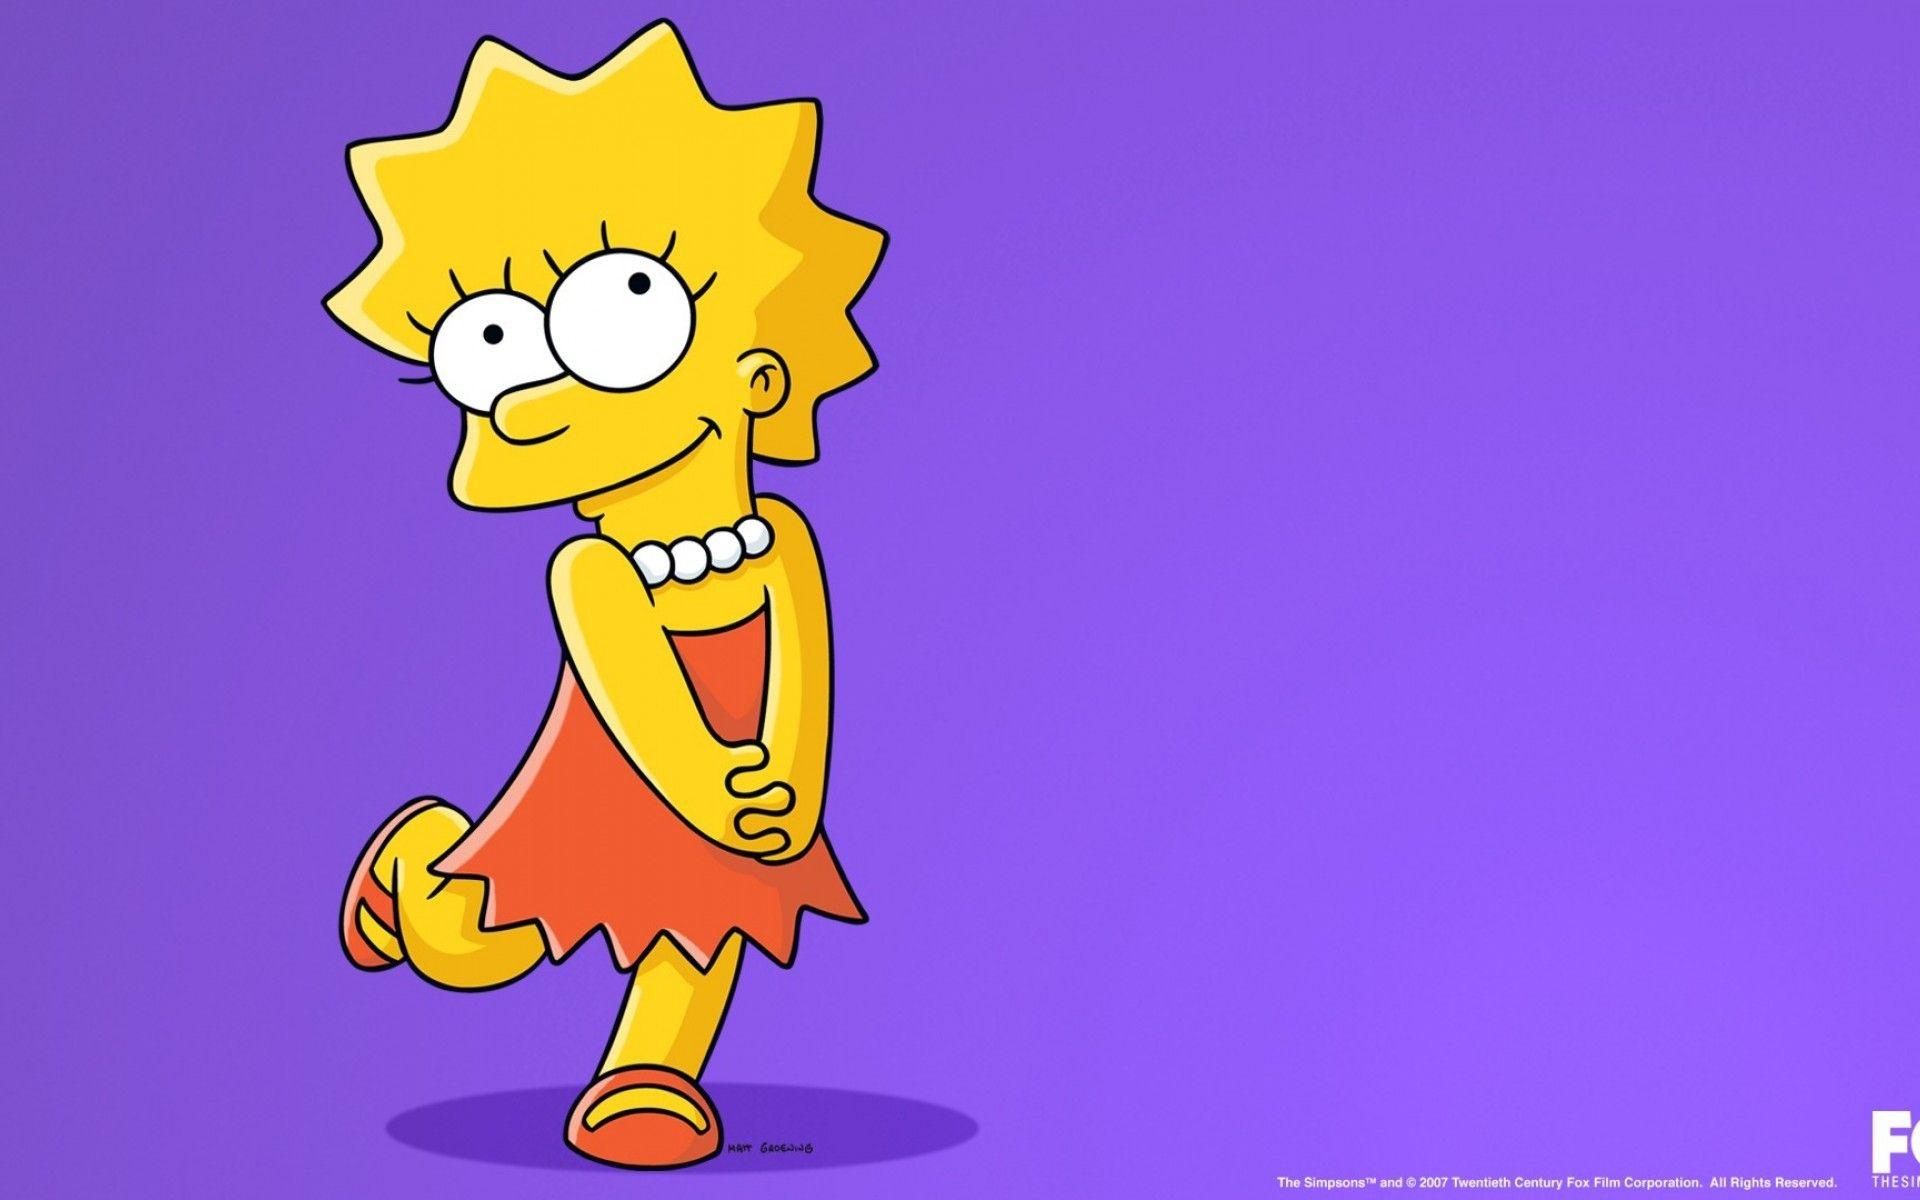 Simpsons Aesthetic Laptop Wallpapers - Top Free Simpsons Aesthetic